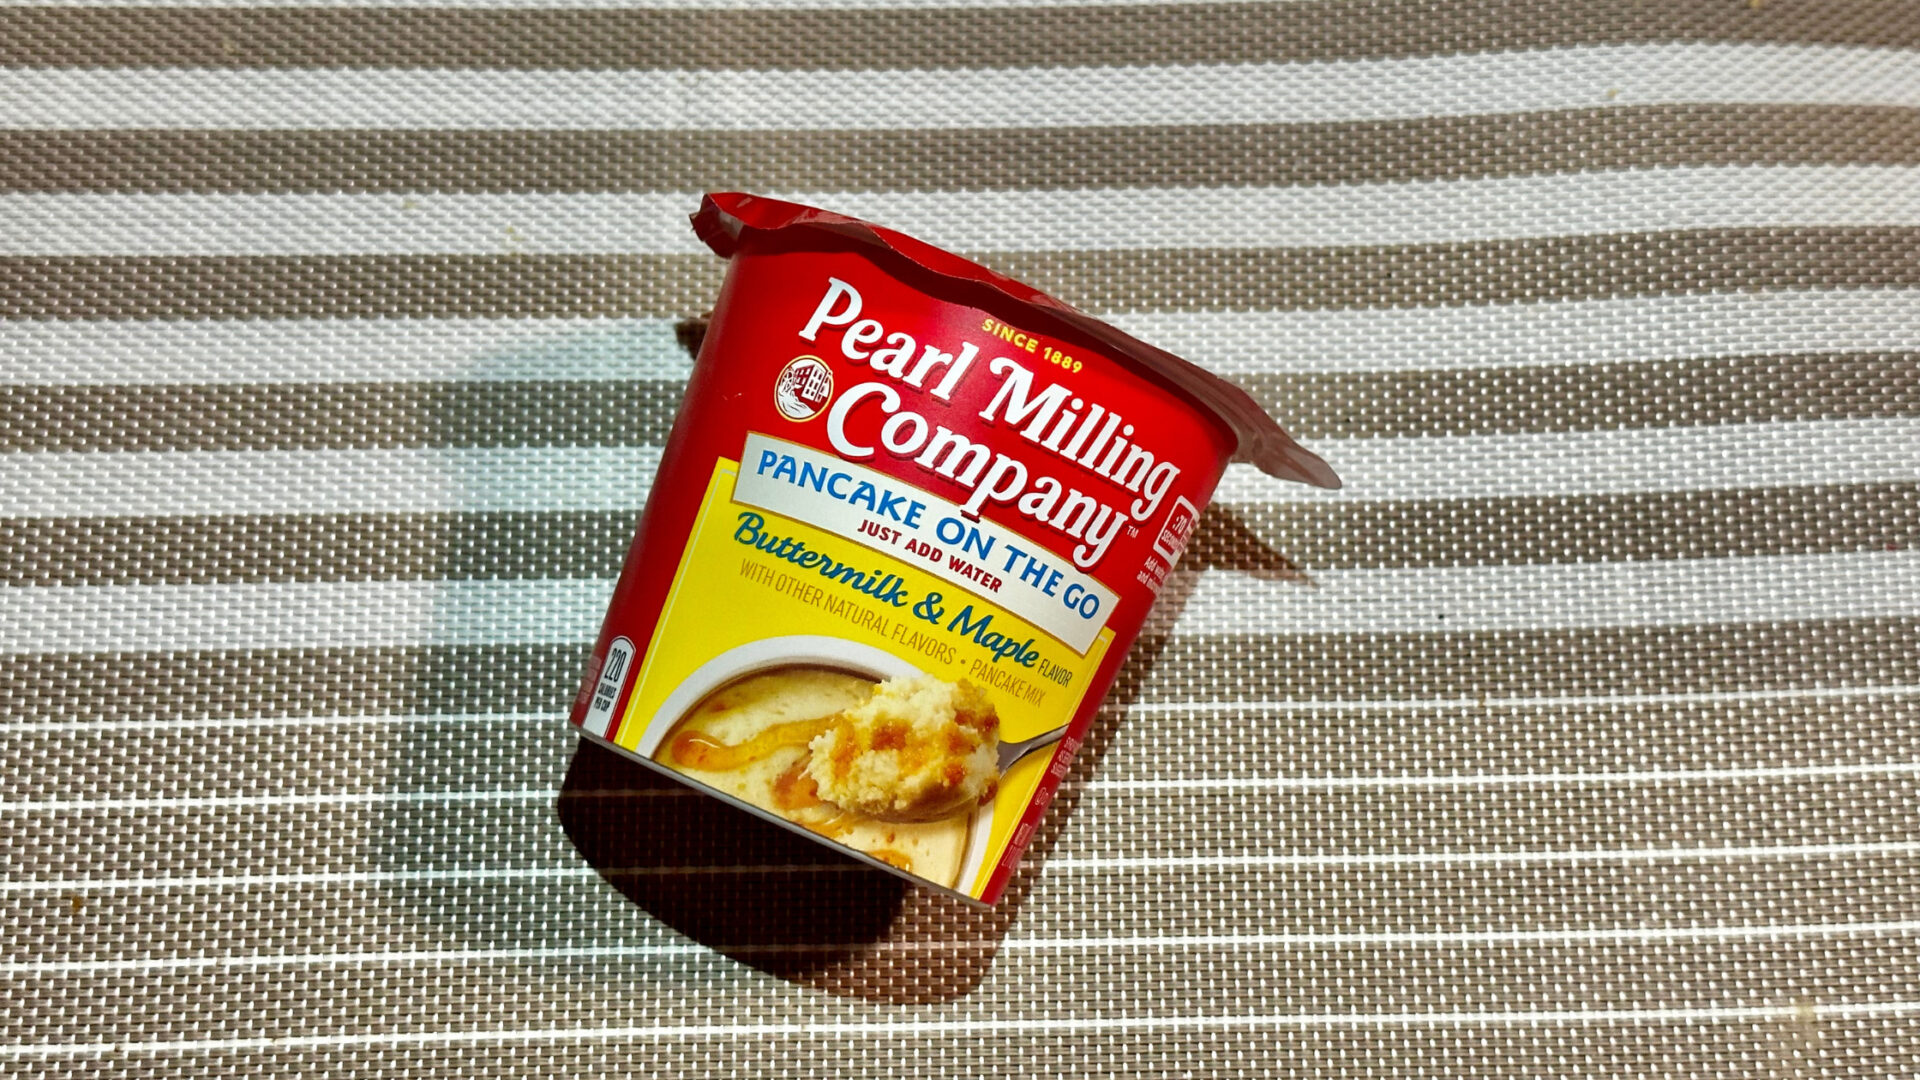 Featured image for the post, "Pearl Milling Company Buttermilk & Maple Pancake on the Go Review"